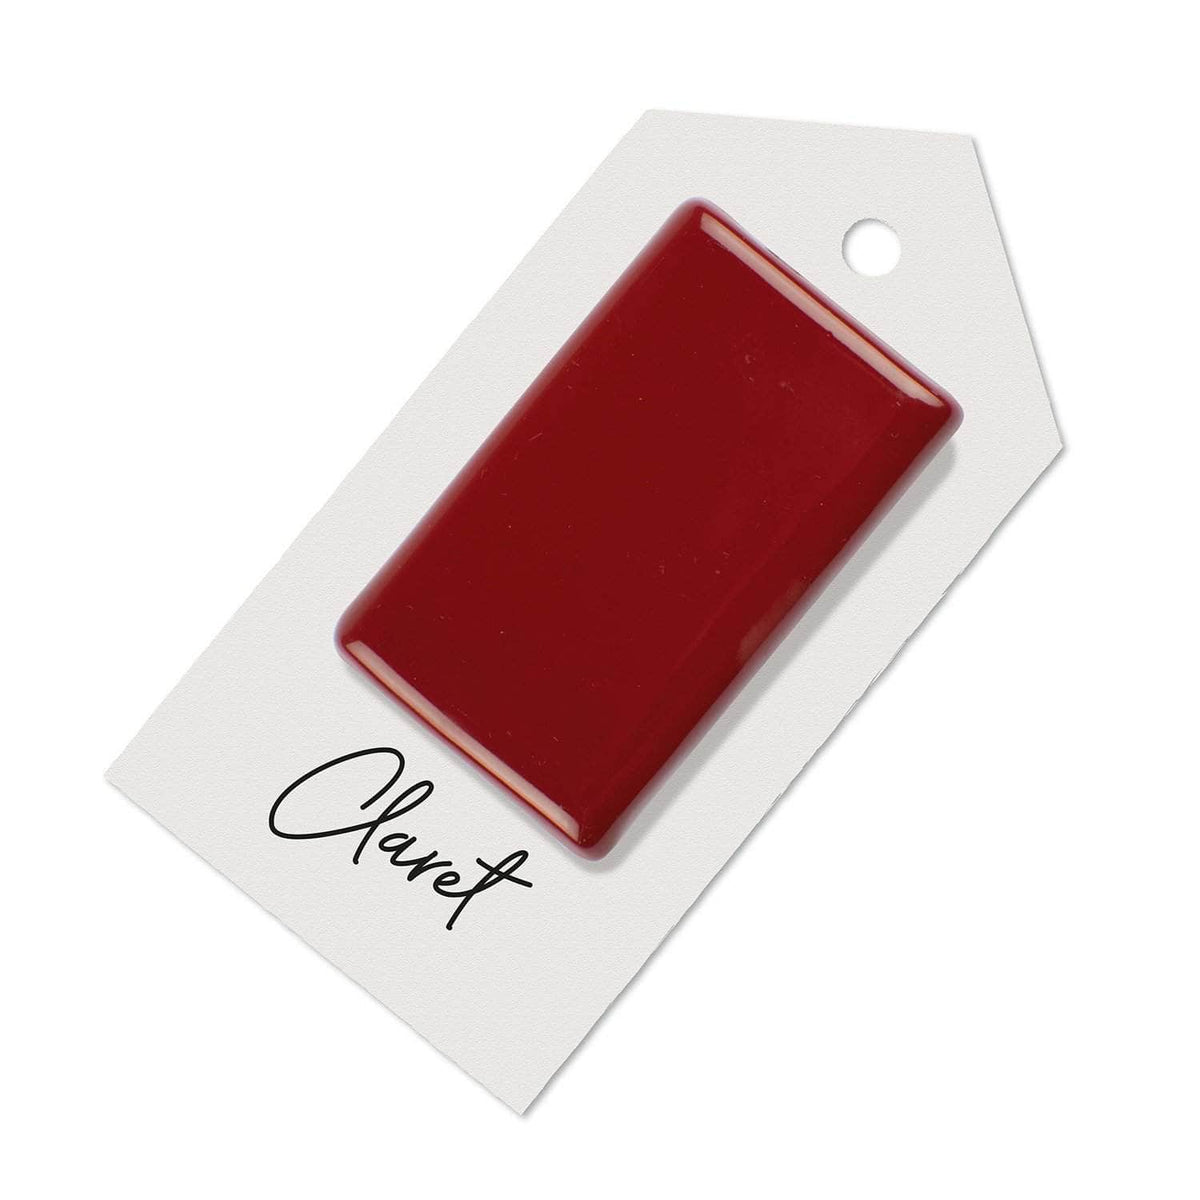 Claret sample for Aga range cooker re-enamelling &amp; reconditioned cookers